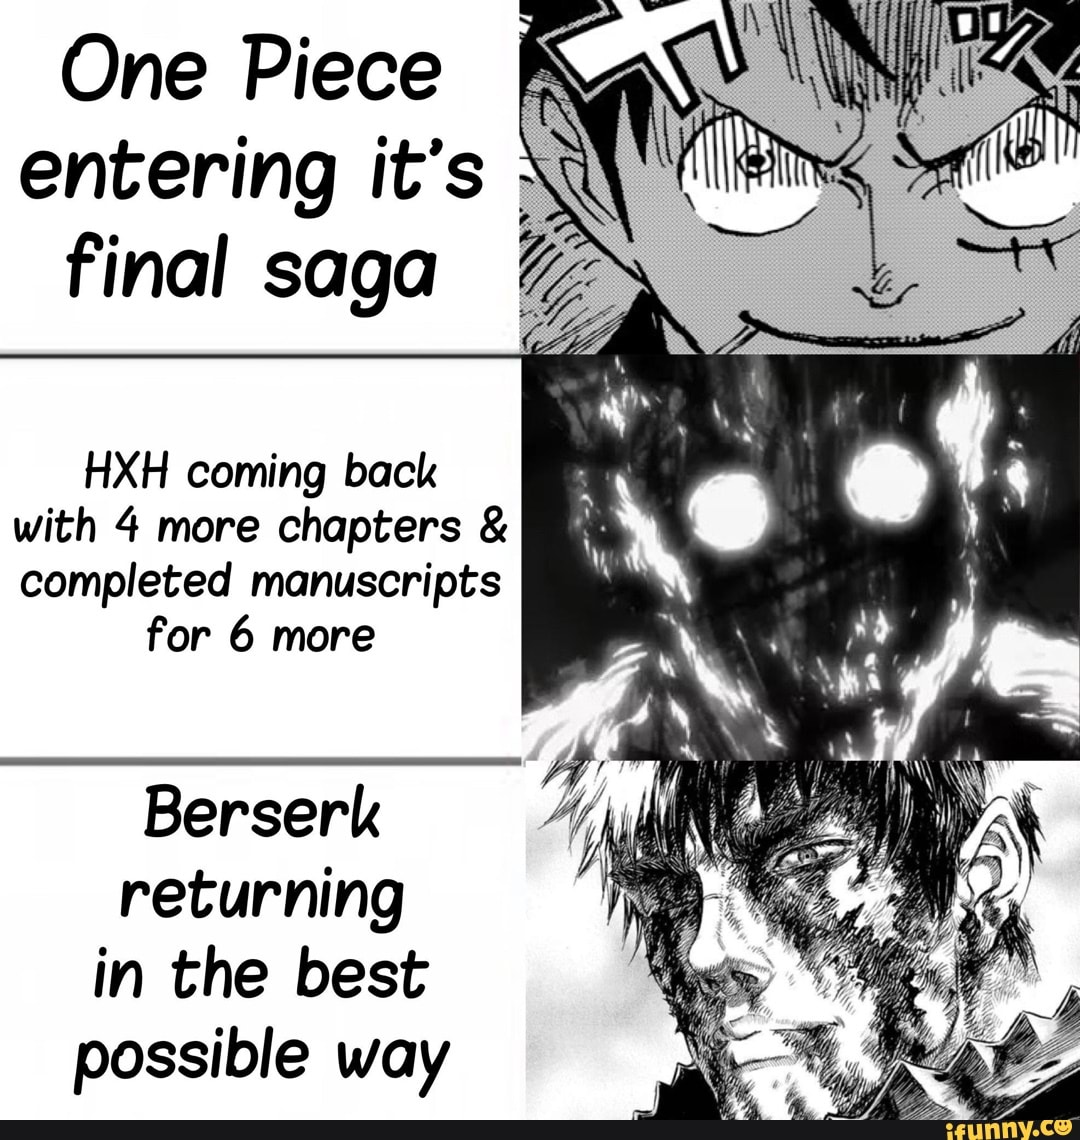 One Piece I entering it's final saga HXH coming back with 4 more